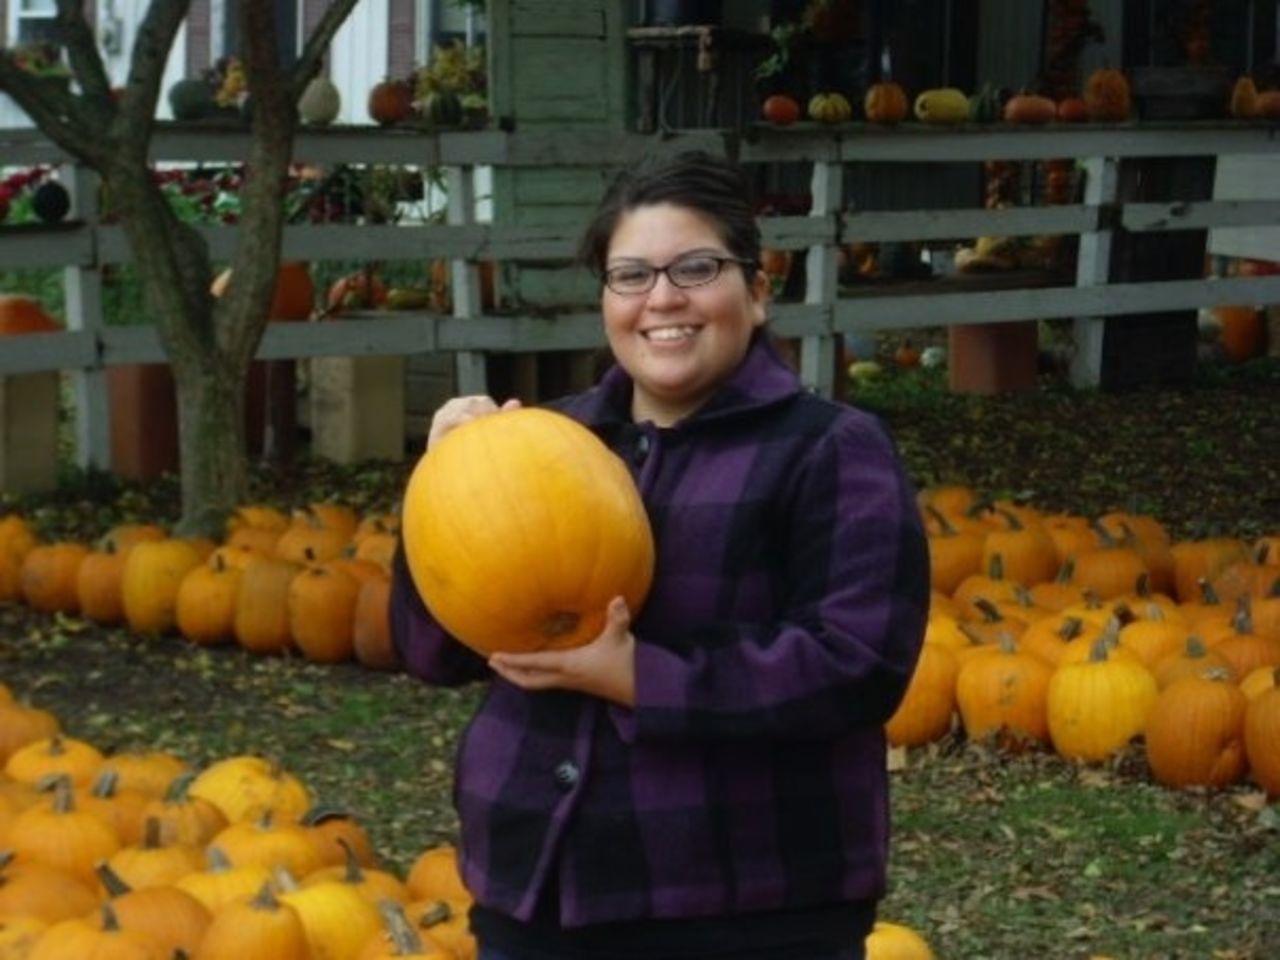 Every year Garcia goes to a pumpkin patch with Monreal to celebrate their anniversary. This photo was taken during their 2009 visit. "I love fall and the month of October," she says.